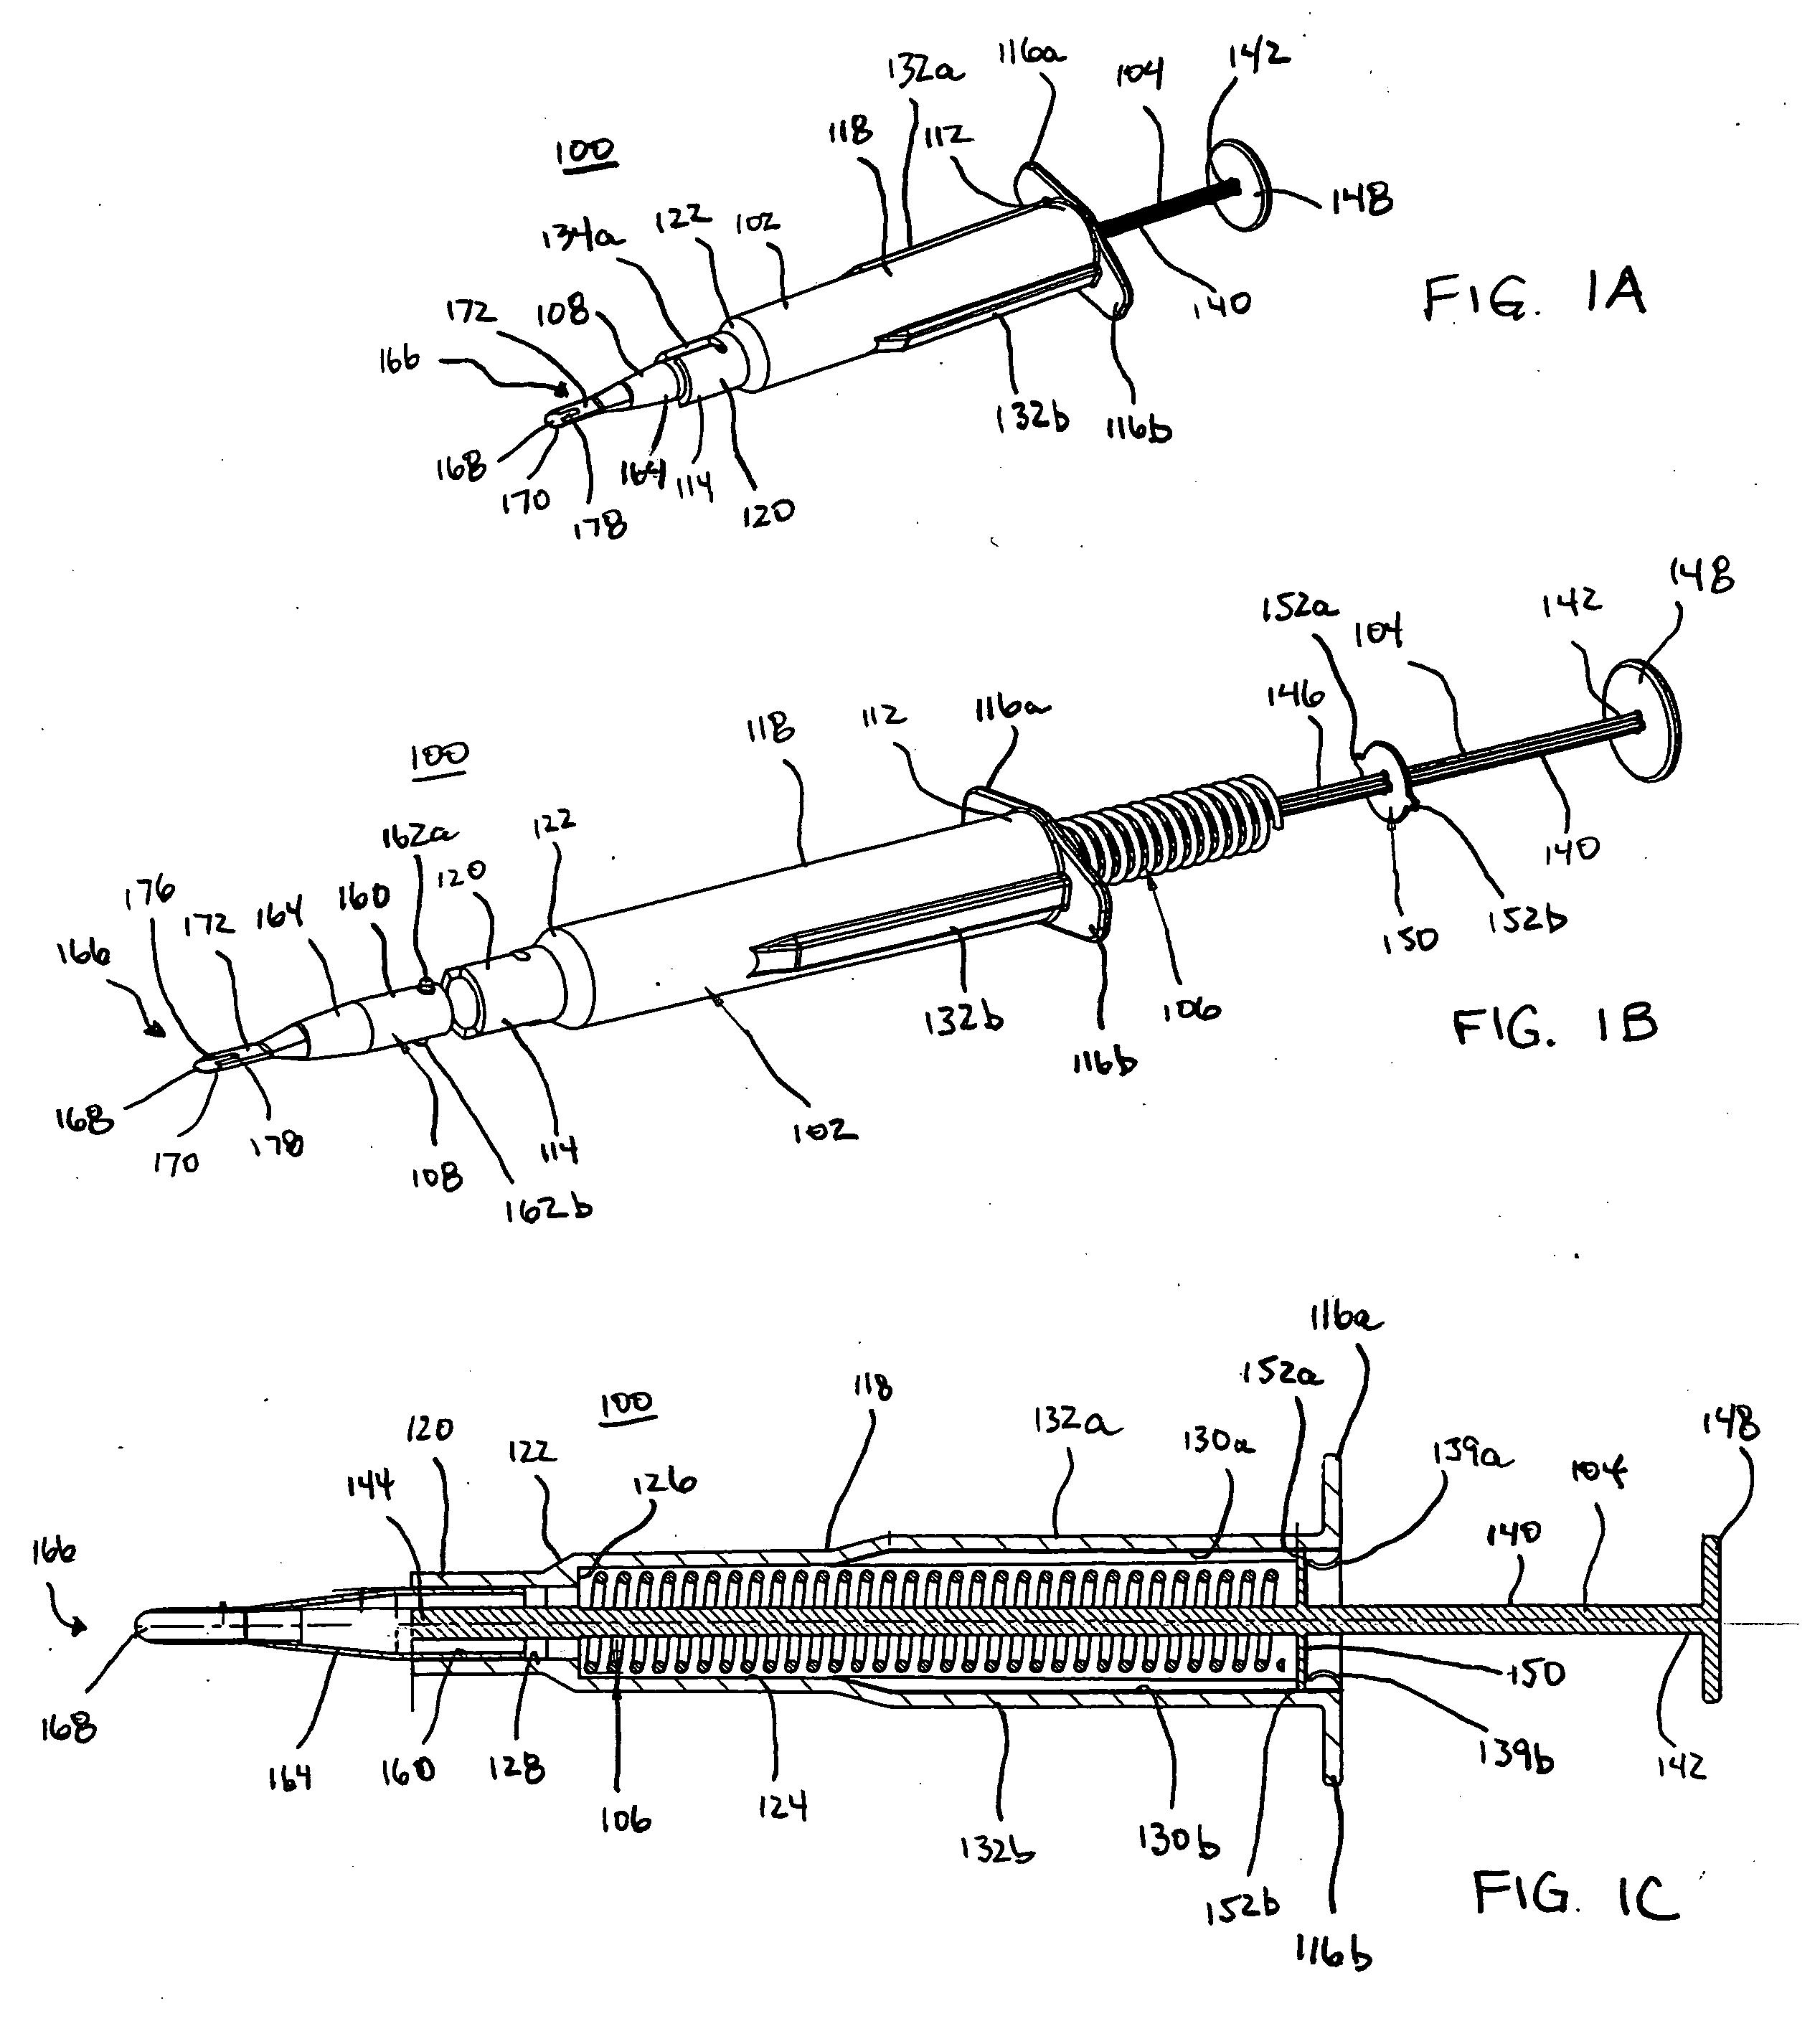 Corneal implant injector assembly and methods of use